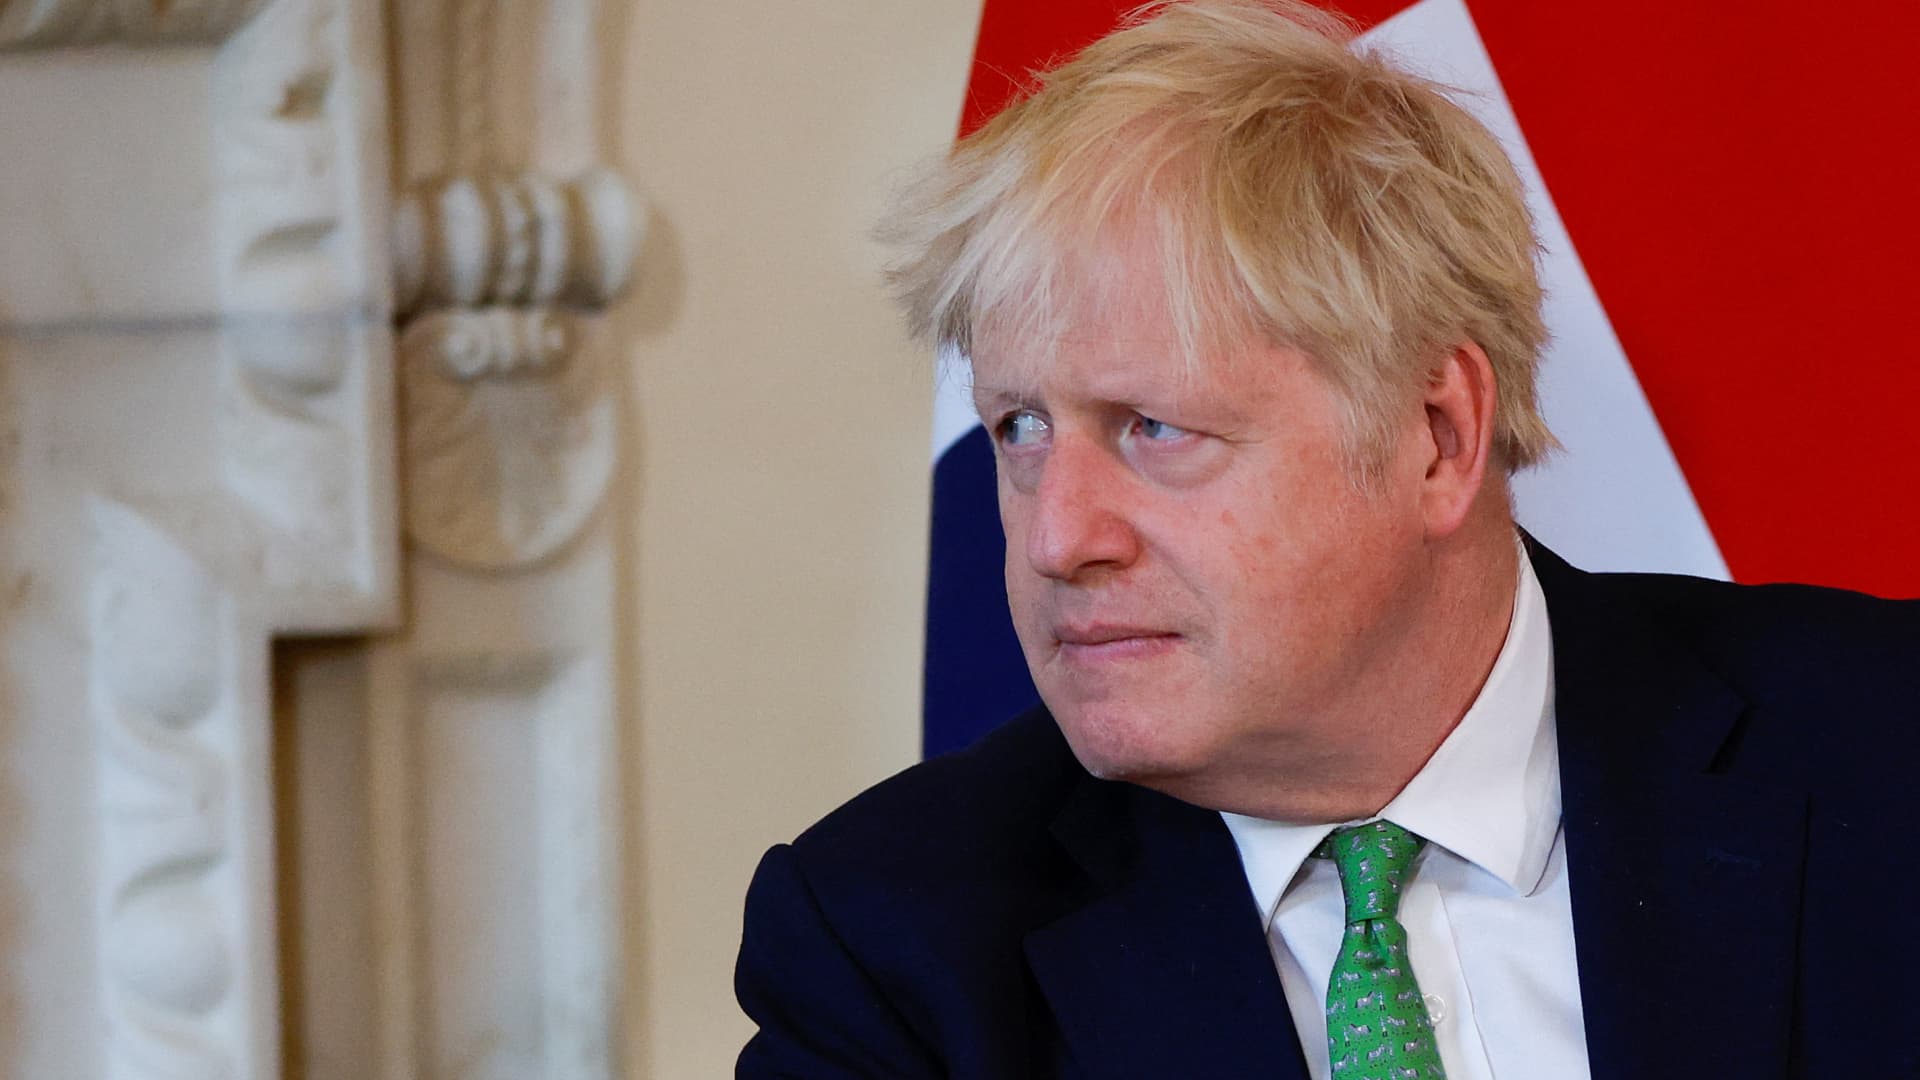 UK’s Boris Johnson fights for his political survival after top resignations and scandals – CNBC